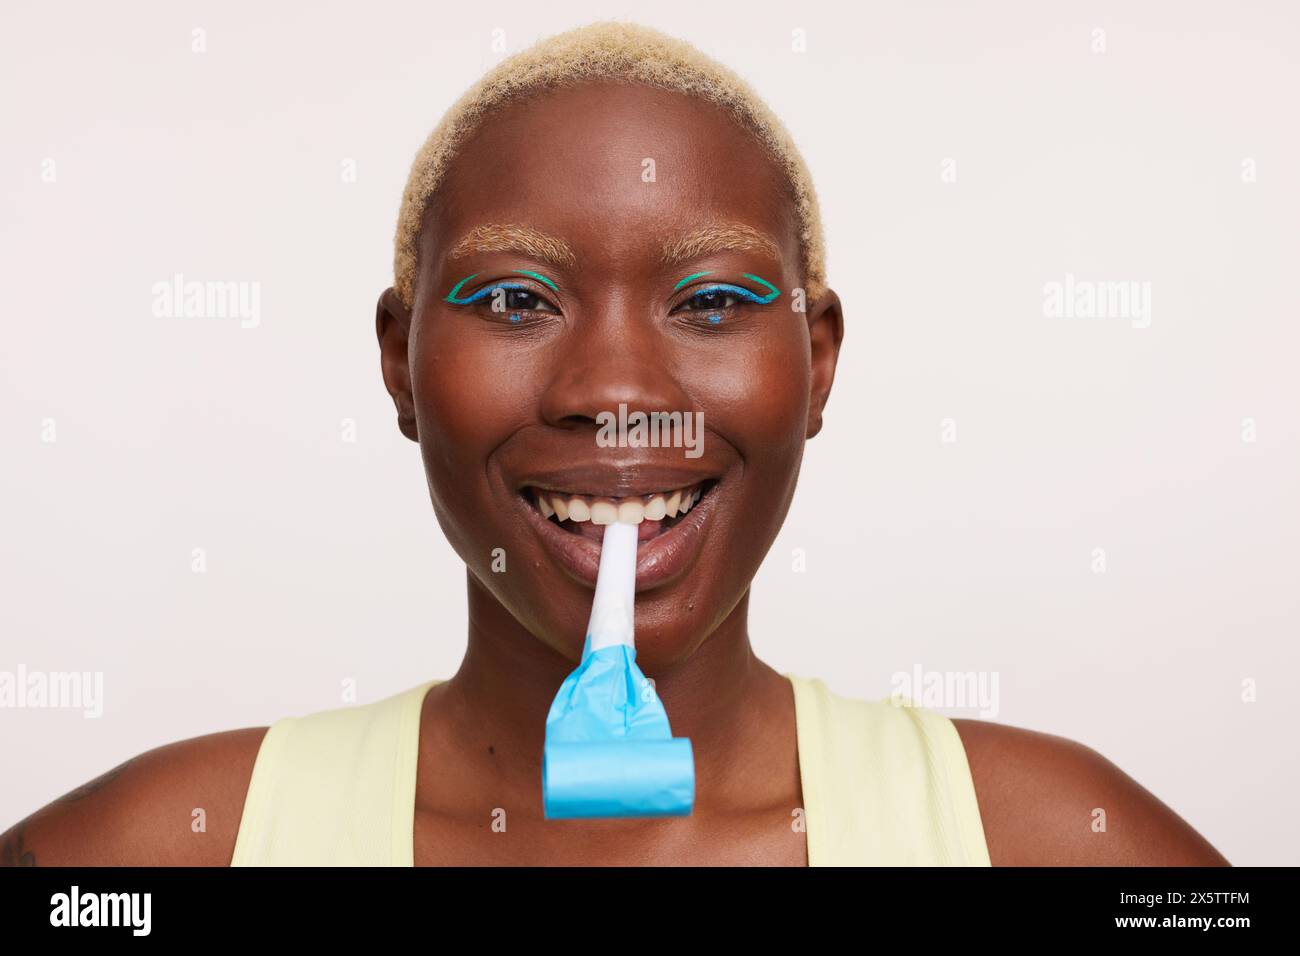 Smiling woman with short white hair, holding party horn blower in mouth Stock Photo